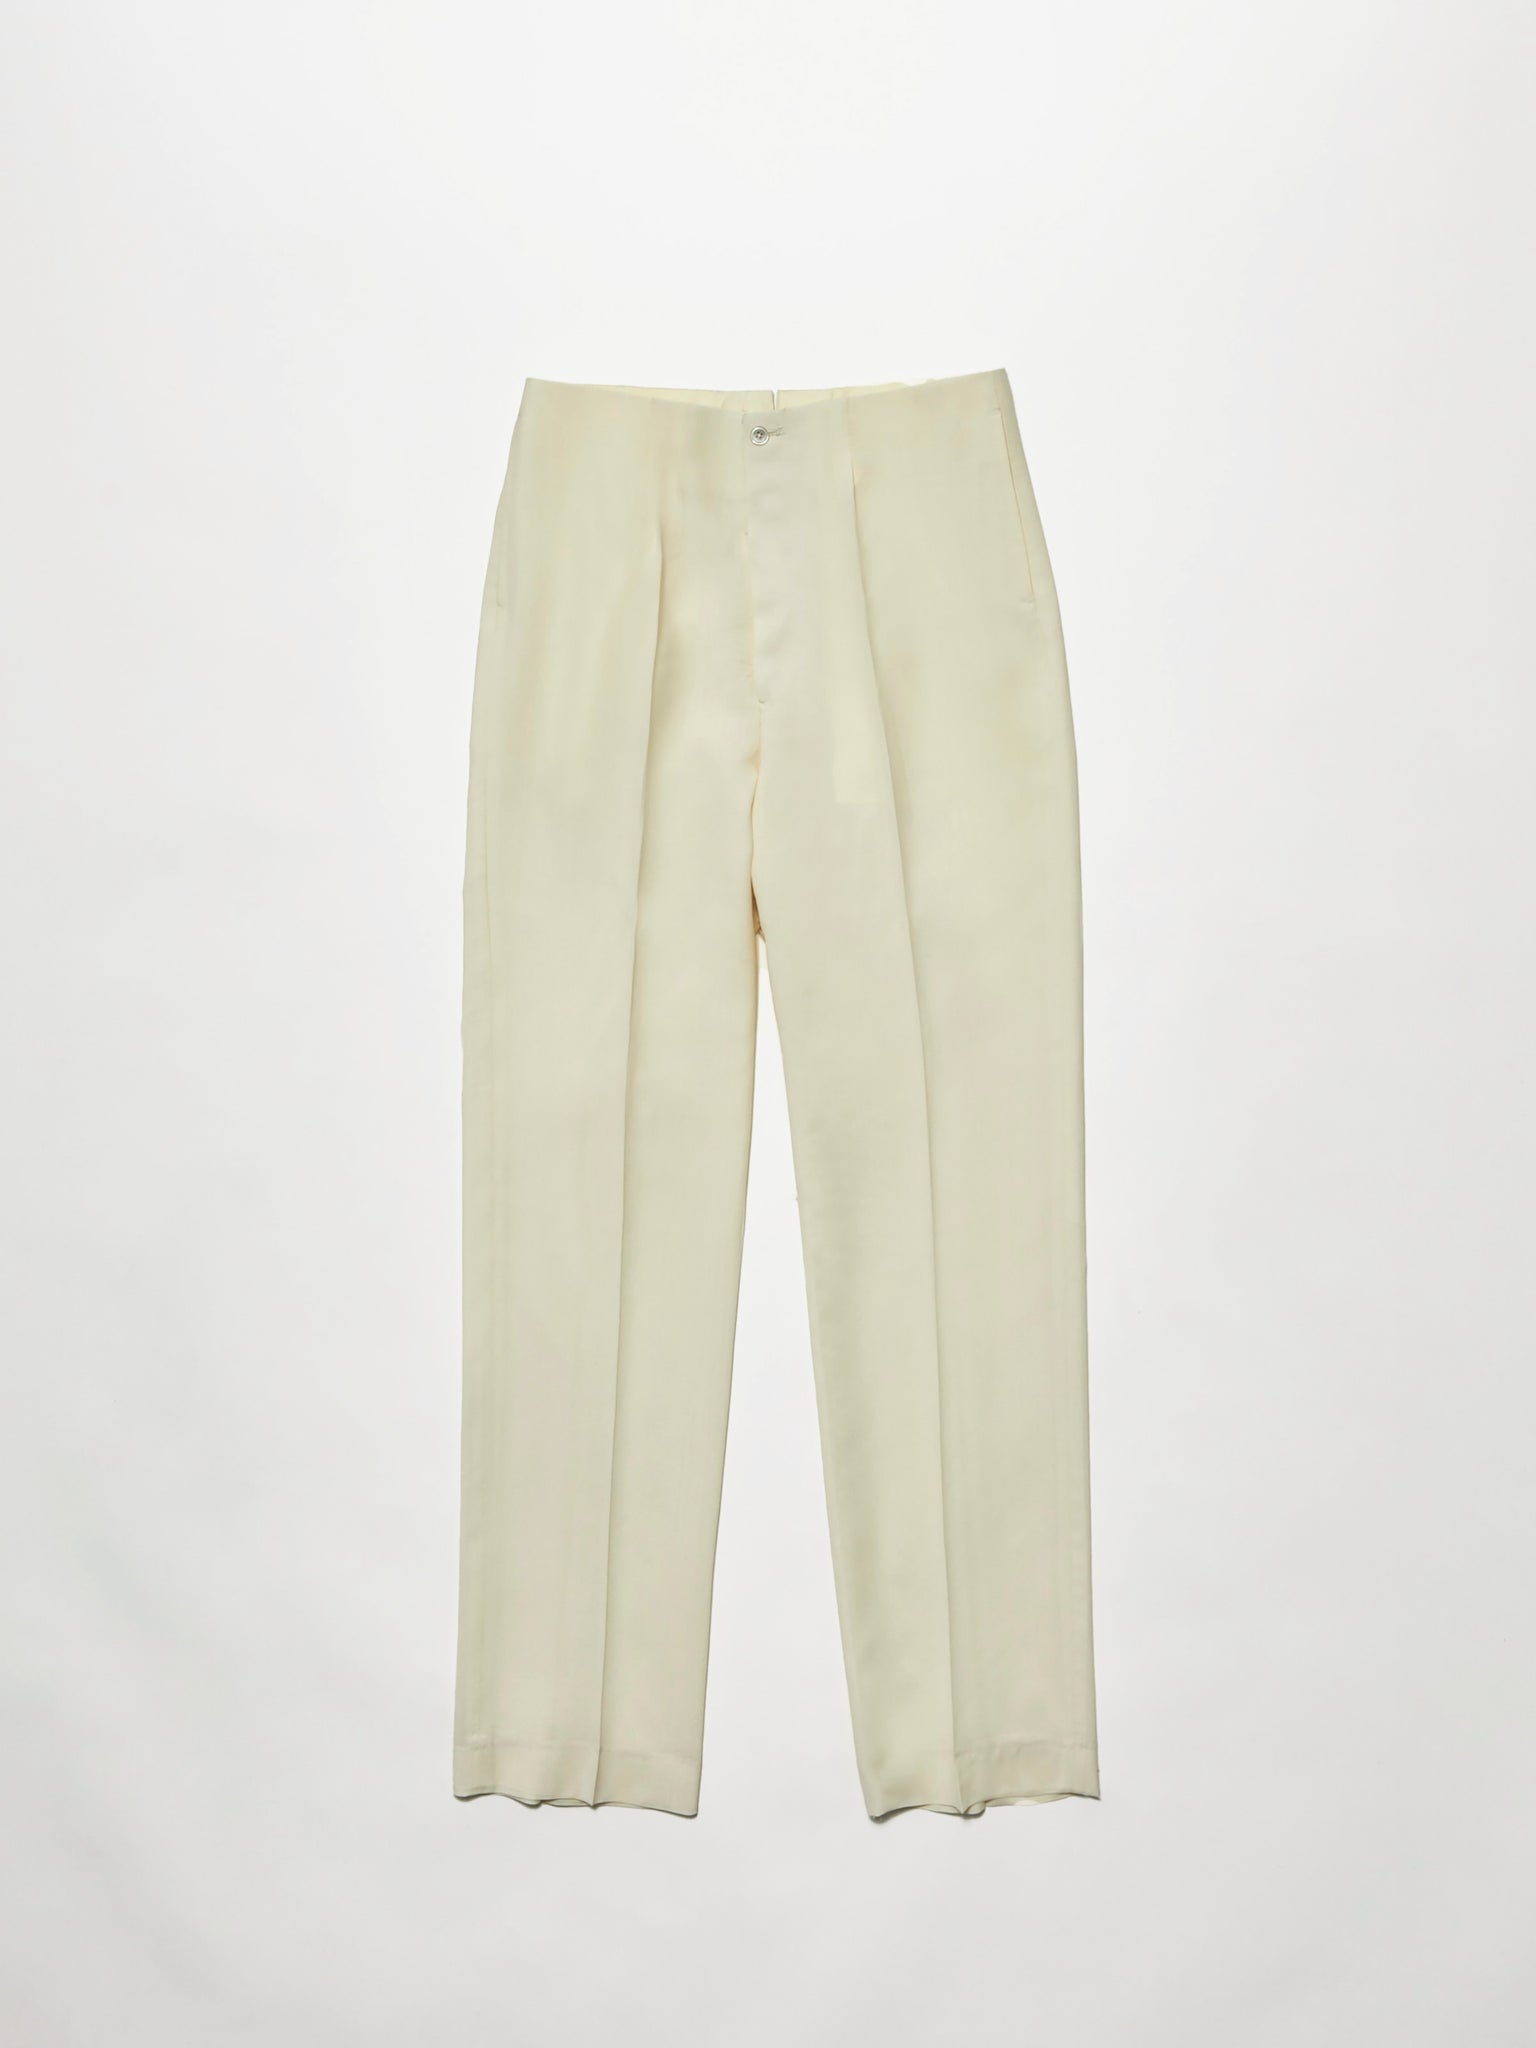 River Island tapered corduroy trousers in cream | ASOS